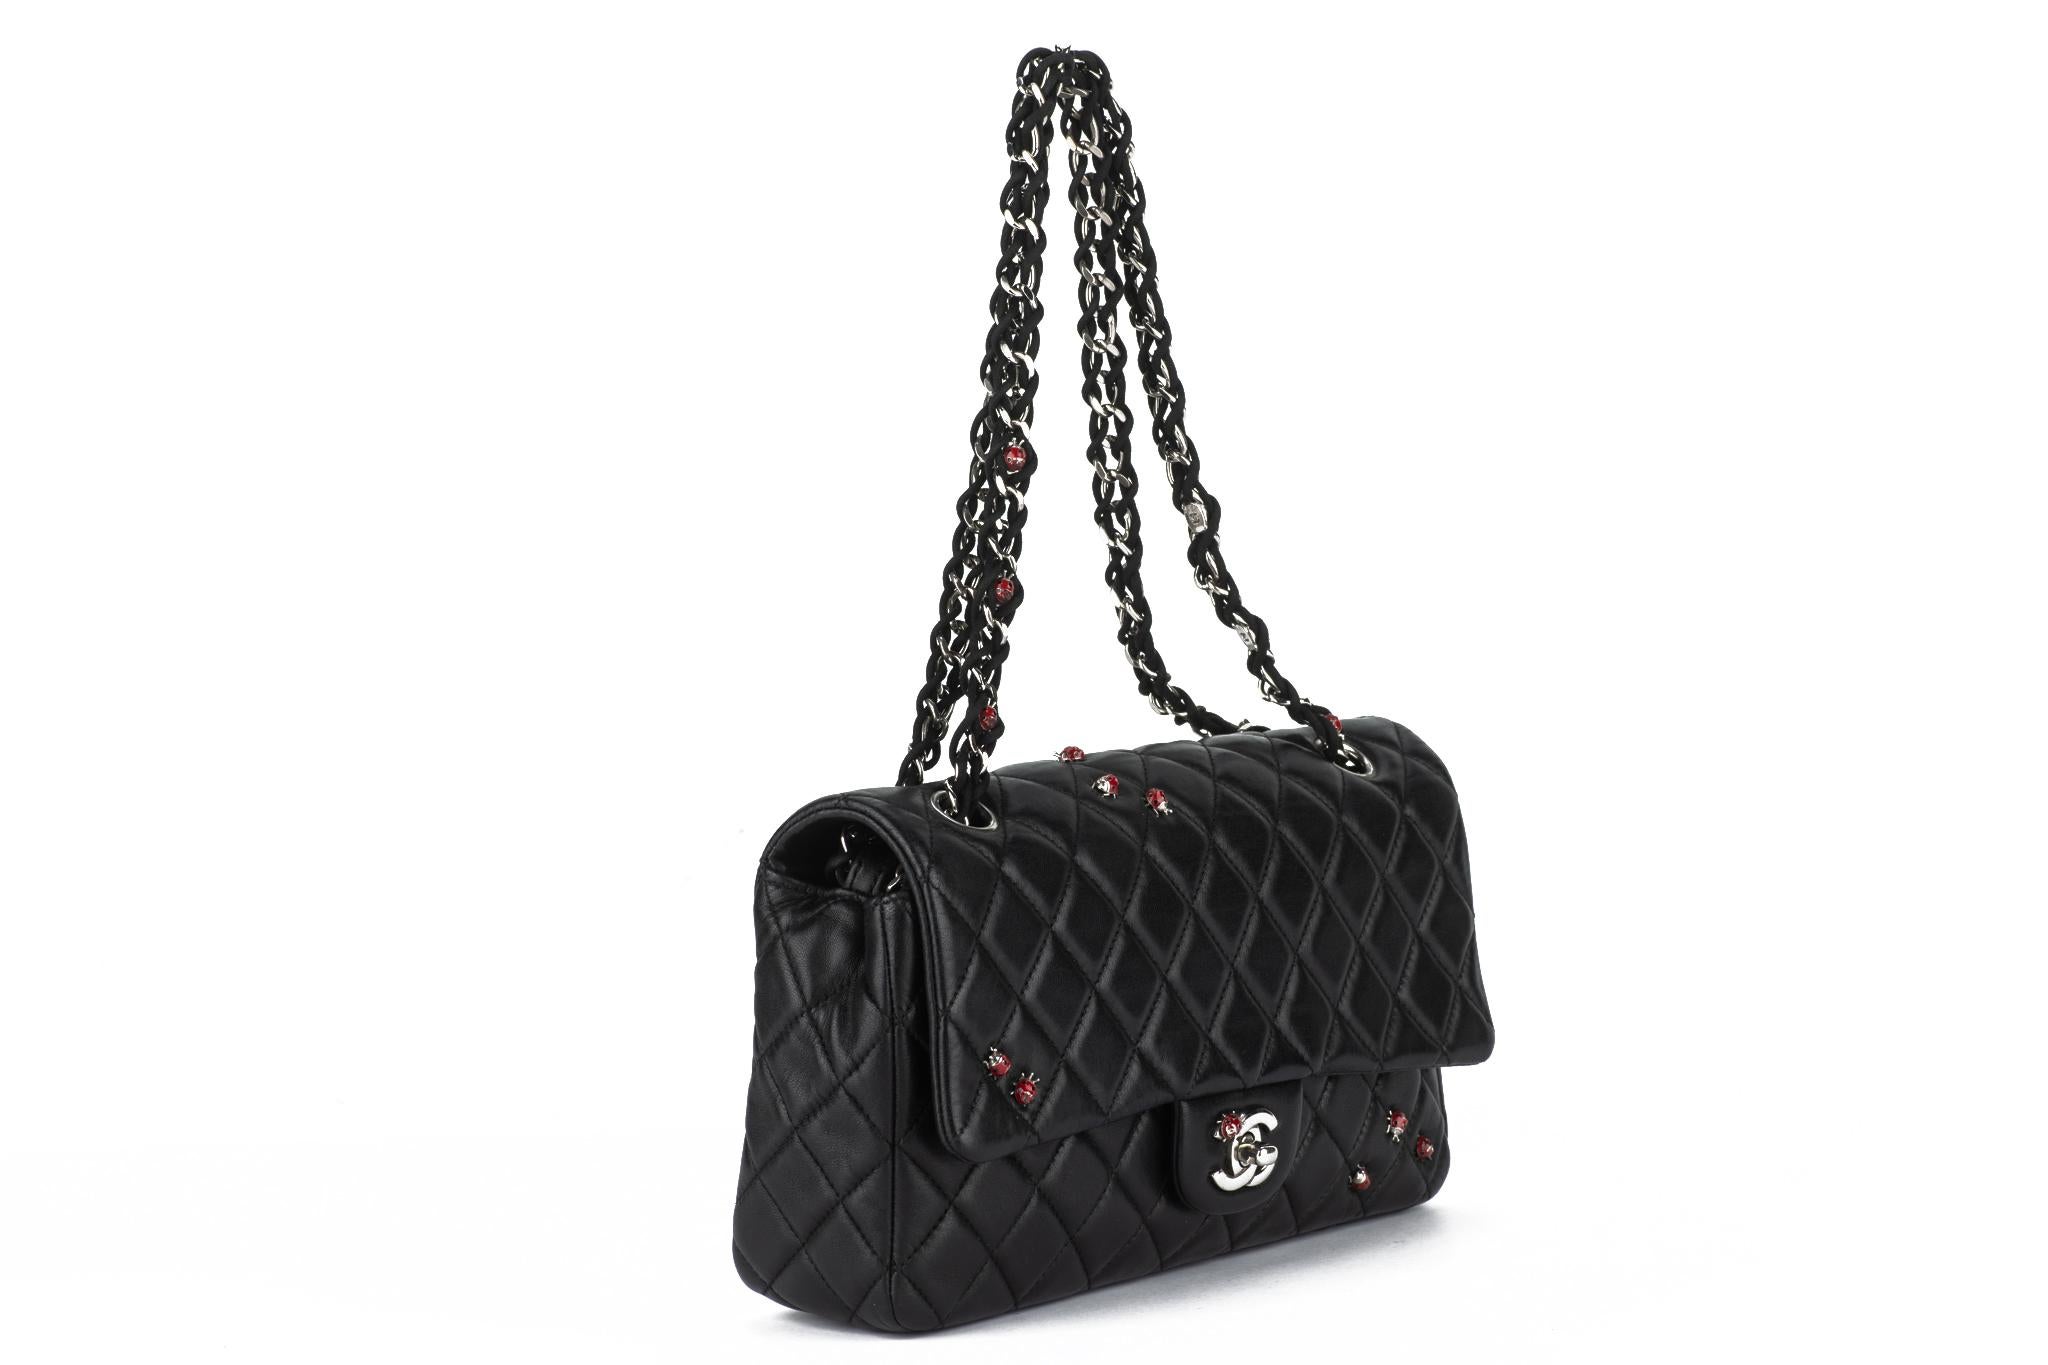 Limited edition lady bug medium flap bag was featured during the 2011Chanel Spring/Summer collection. It features black quilted lambskin and silver hardware. The interior is lined in a tonal textile. Enamelled ladybugs decorate the bag